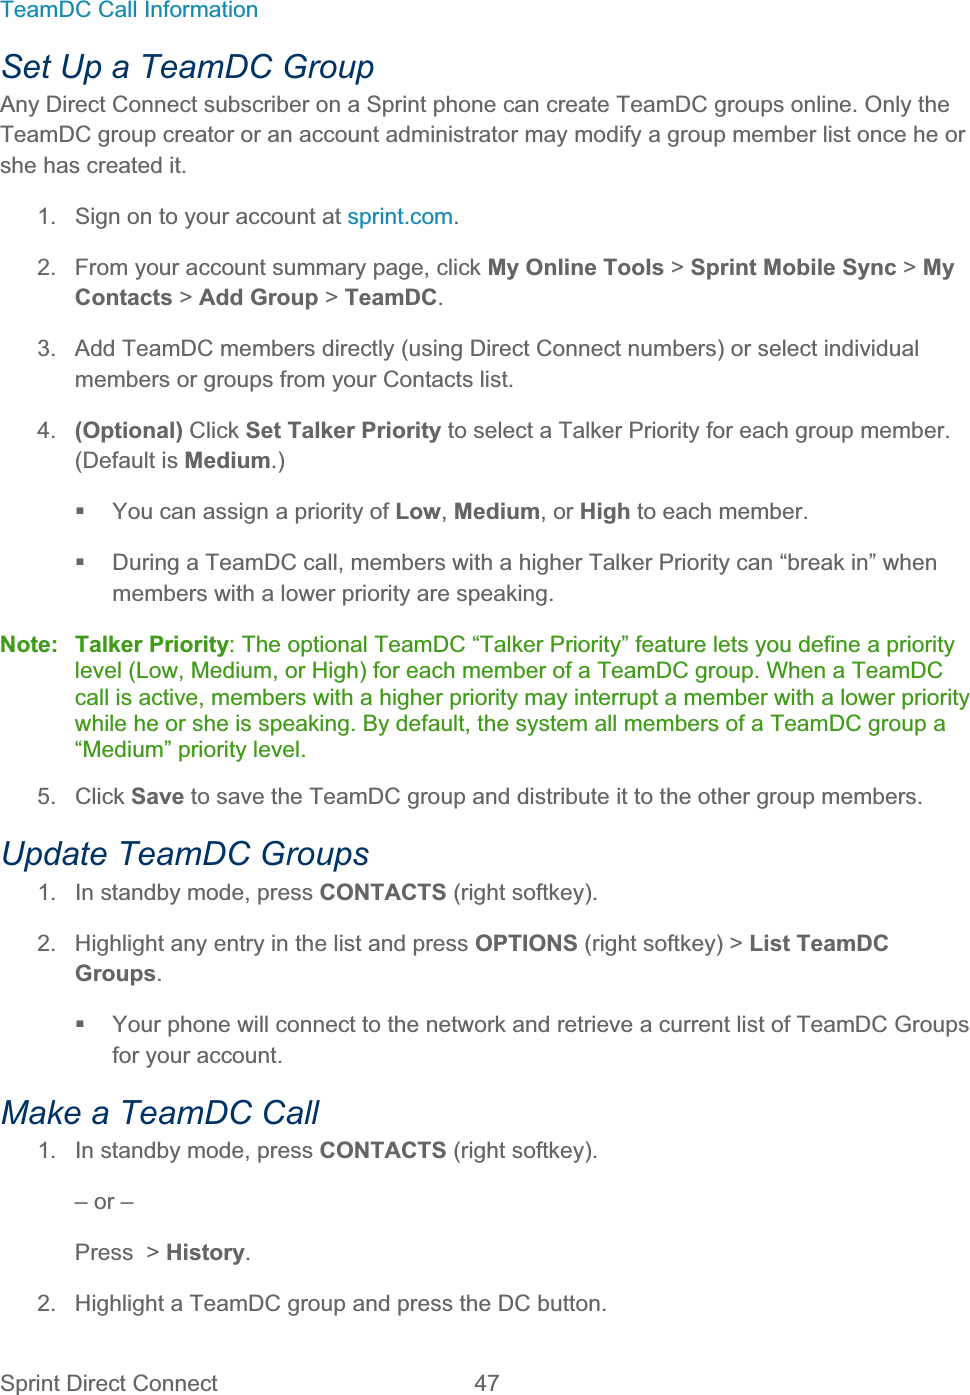 Sprint Direct Connect  47   TeamDC Call Information Set Up a TeamDC Group Any Direct Connect subscriber on a Sprint phone can create TeamDC groups online. Only the TeamDC group creator or an account administrator may modify a group member list once he or she has created it. 1.  Sign on to your account at sprint.com.2.  From your account summary page, click My Online Tools &gt; Sprint Mobile Sync &gt; My Contacts &gt; Add Group &gt; TeamDC.3.  Add TeamDC members directly (using Direct Connect numbers) or select individual members or groups from your Contacts list. 4. (Optional) Click Set Talker Priority to select a Talker Priority for each group member. (Default is Medium.)  You can assign a priority of Low,Medium, or High to each member.   During a TeamDC call, members with a higher Talker Priority can “break in” when members with a lower priority are speaking. Note: Talker Priority: The optional TeamDC “Talker Priority” feature lets you define a priority level (Low, Medium, or High) for each member of a TeamDC group. When a TeamDC call is active, members with a higher priority may interrupt a member with a lower priority while he or she is speaking. By default, the system all members of a TeamDC group a “Medium” priority level. 5. Click Save to save the TeamDC group and distribute it to the other group members. Update TeamDC Groups 1.  In standby mode, press CONTACTS (right softkey). 2.  Highlight any entry in the list and press OPTIONS (right softkey) &gt; List TeamDC Groups.  Your phone will connect to the network and retrieve a current list of TeamDC Groups for your account. Make a TeamDC Call 1.  In standby mode, press CONTACTS (right softkey). – or – Press  &gt; History.2.  Highlight a TeamDC group and press the DC button. 